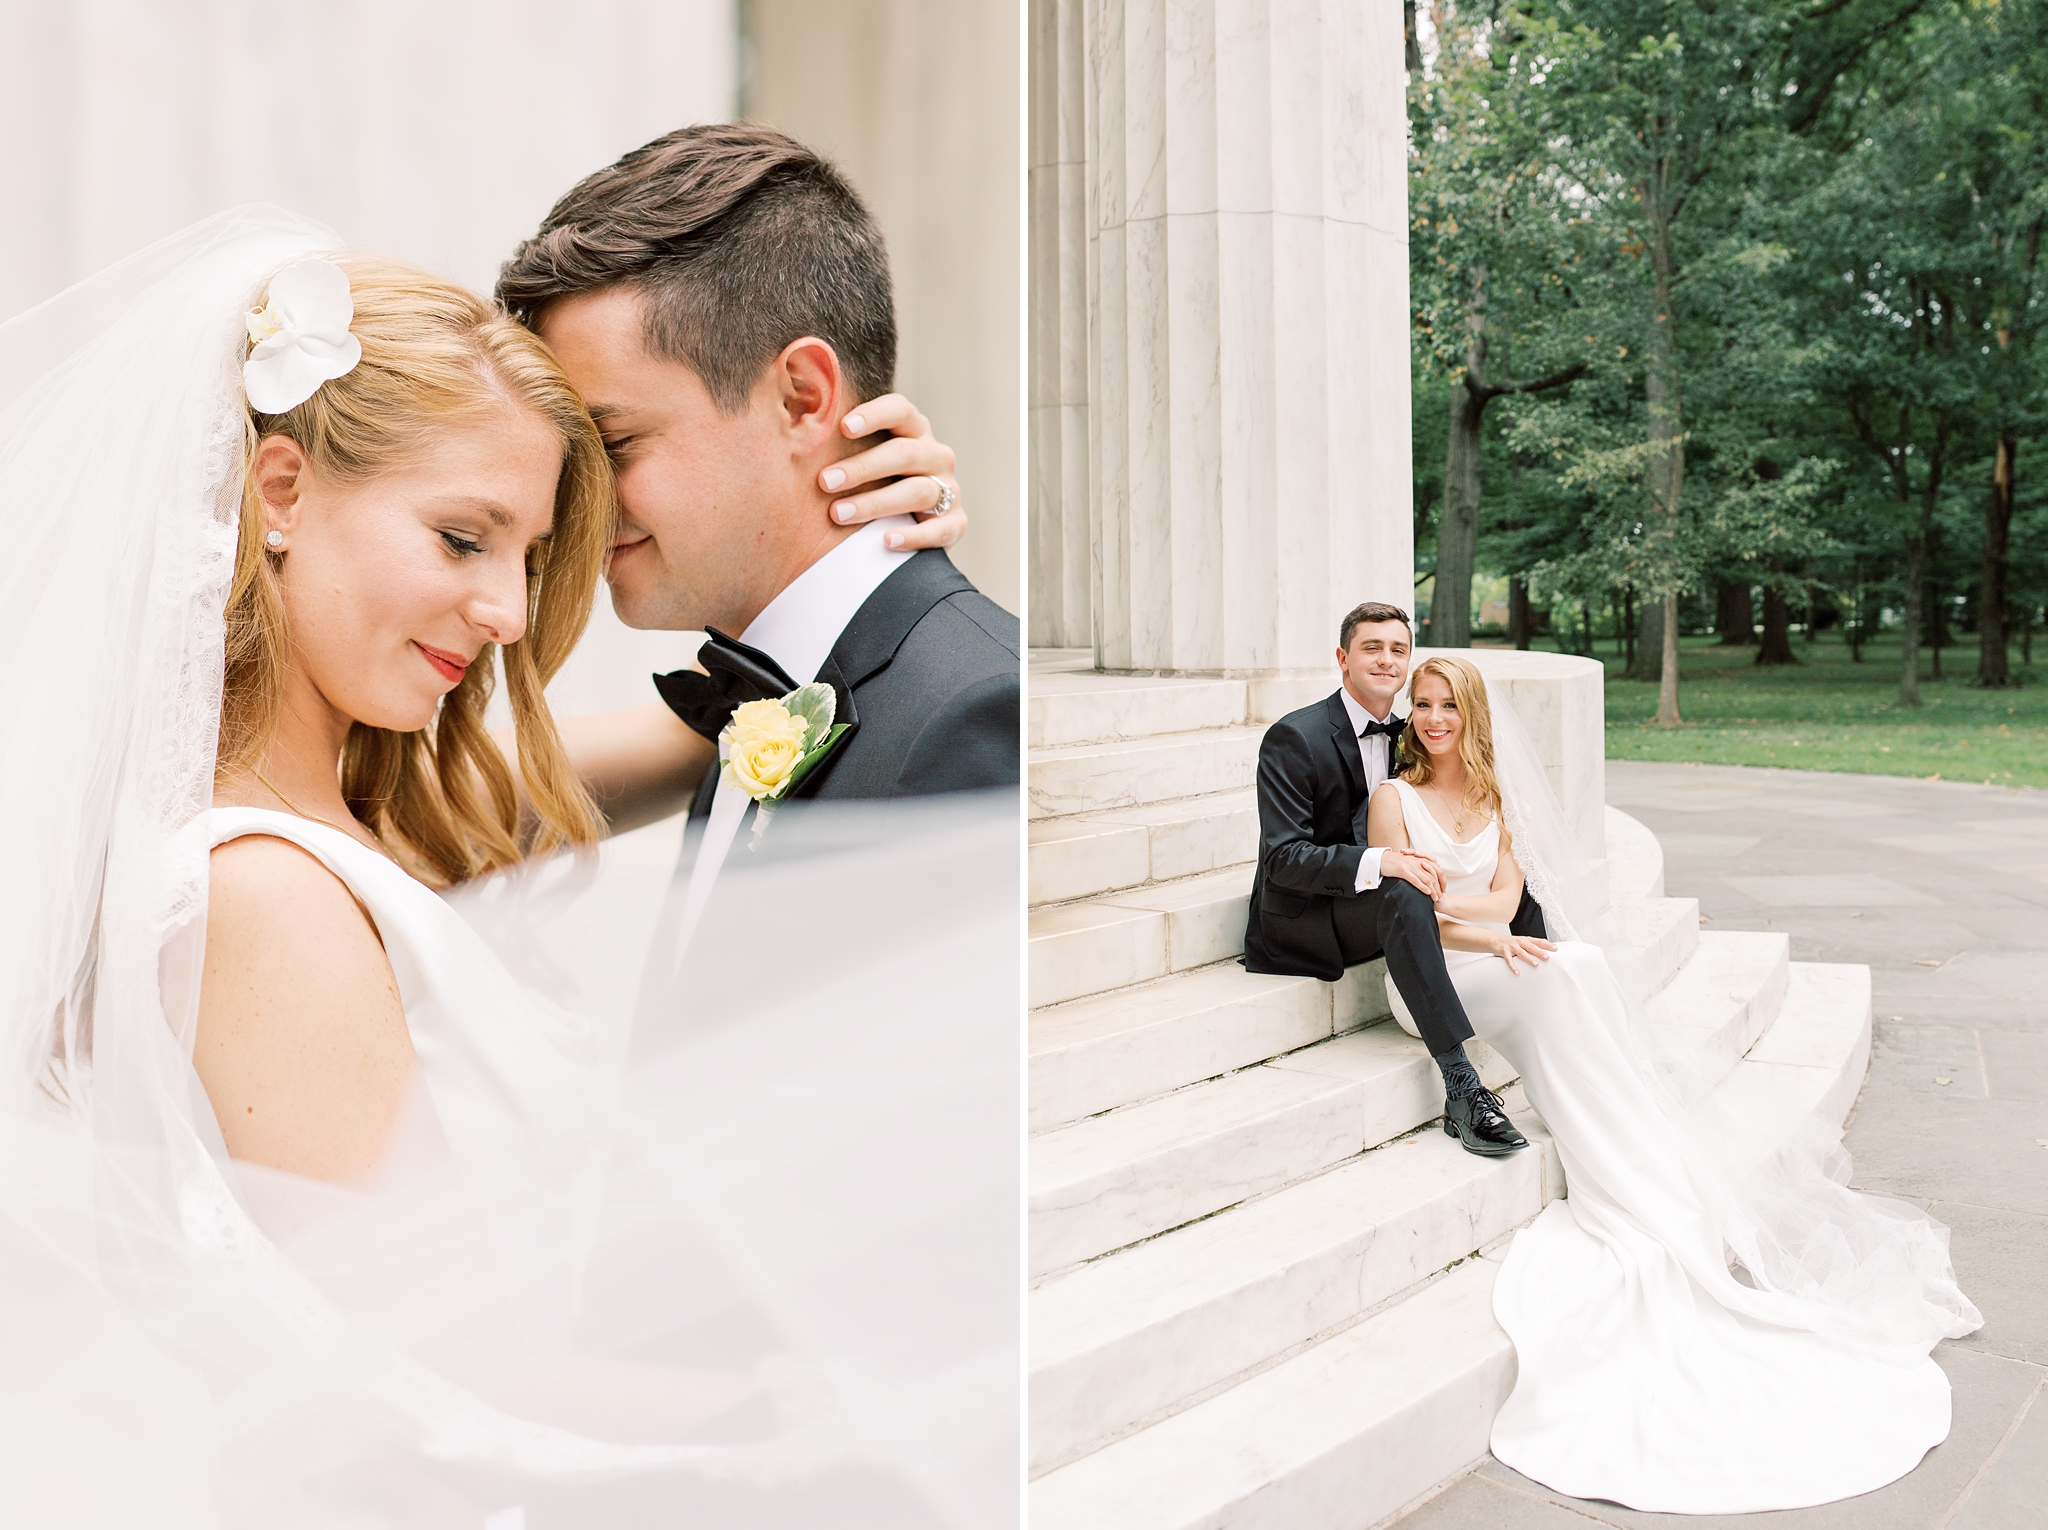 A colorful summer wedding at District Winery in Washington, DC with portraits at the Lincoln Memorial and DC War Memorial.